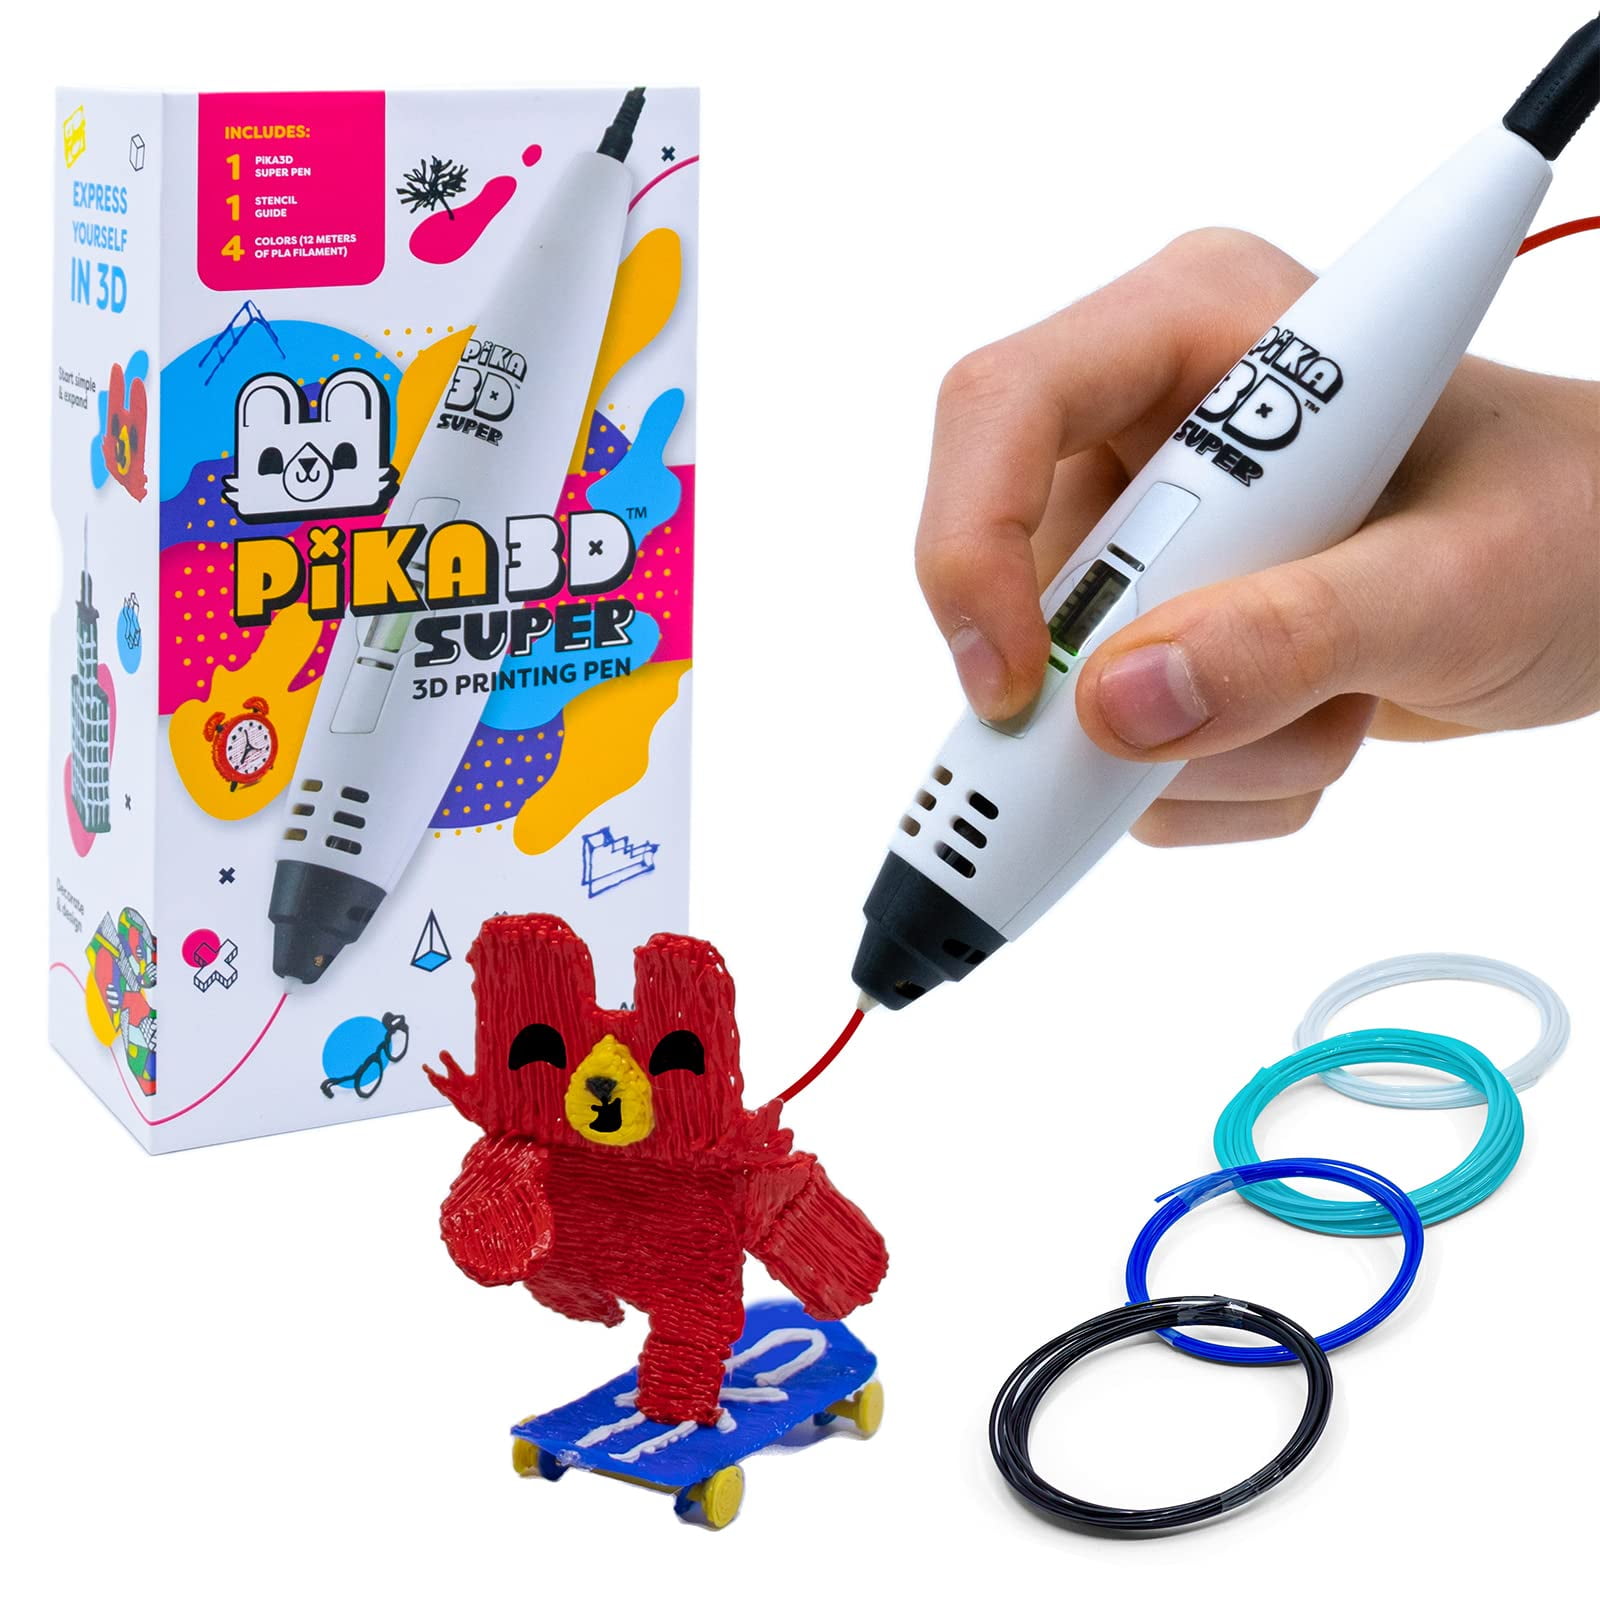 PIKA3D Junior 3D Printing Pen for Kids Ages 6+ - Ready to use and Child  Safe 3D Pen with no hot Parts, Free Refills Included 